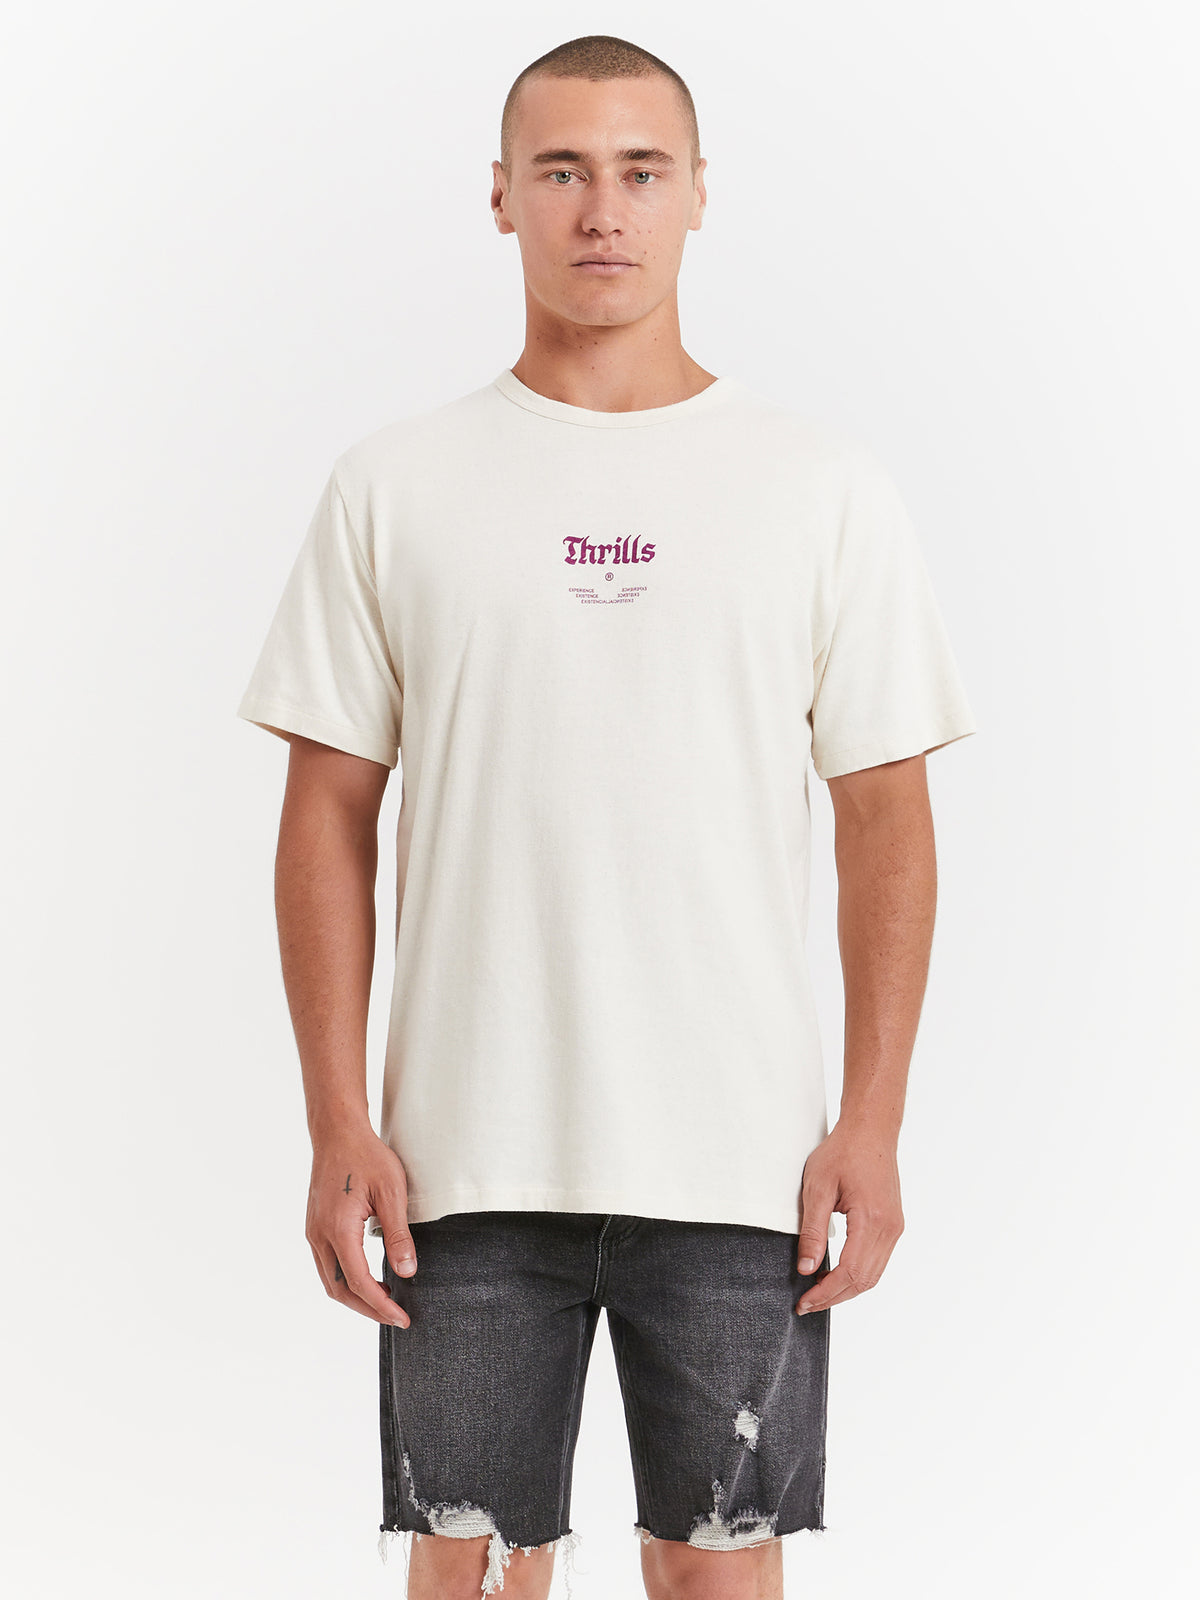 Wishes Come True Merch Fit T-Shirt in Unbleached